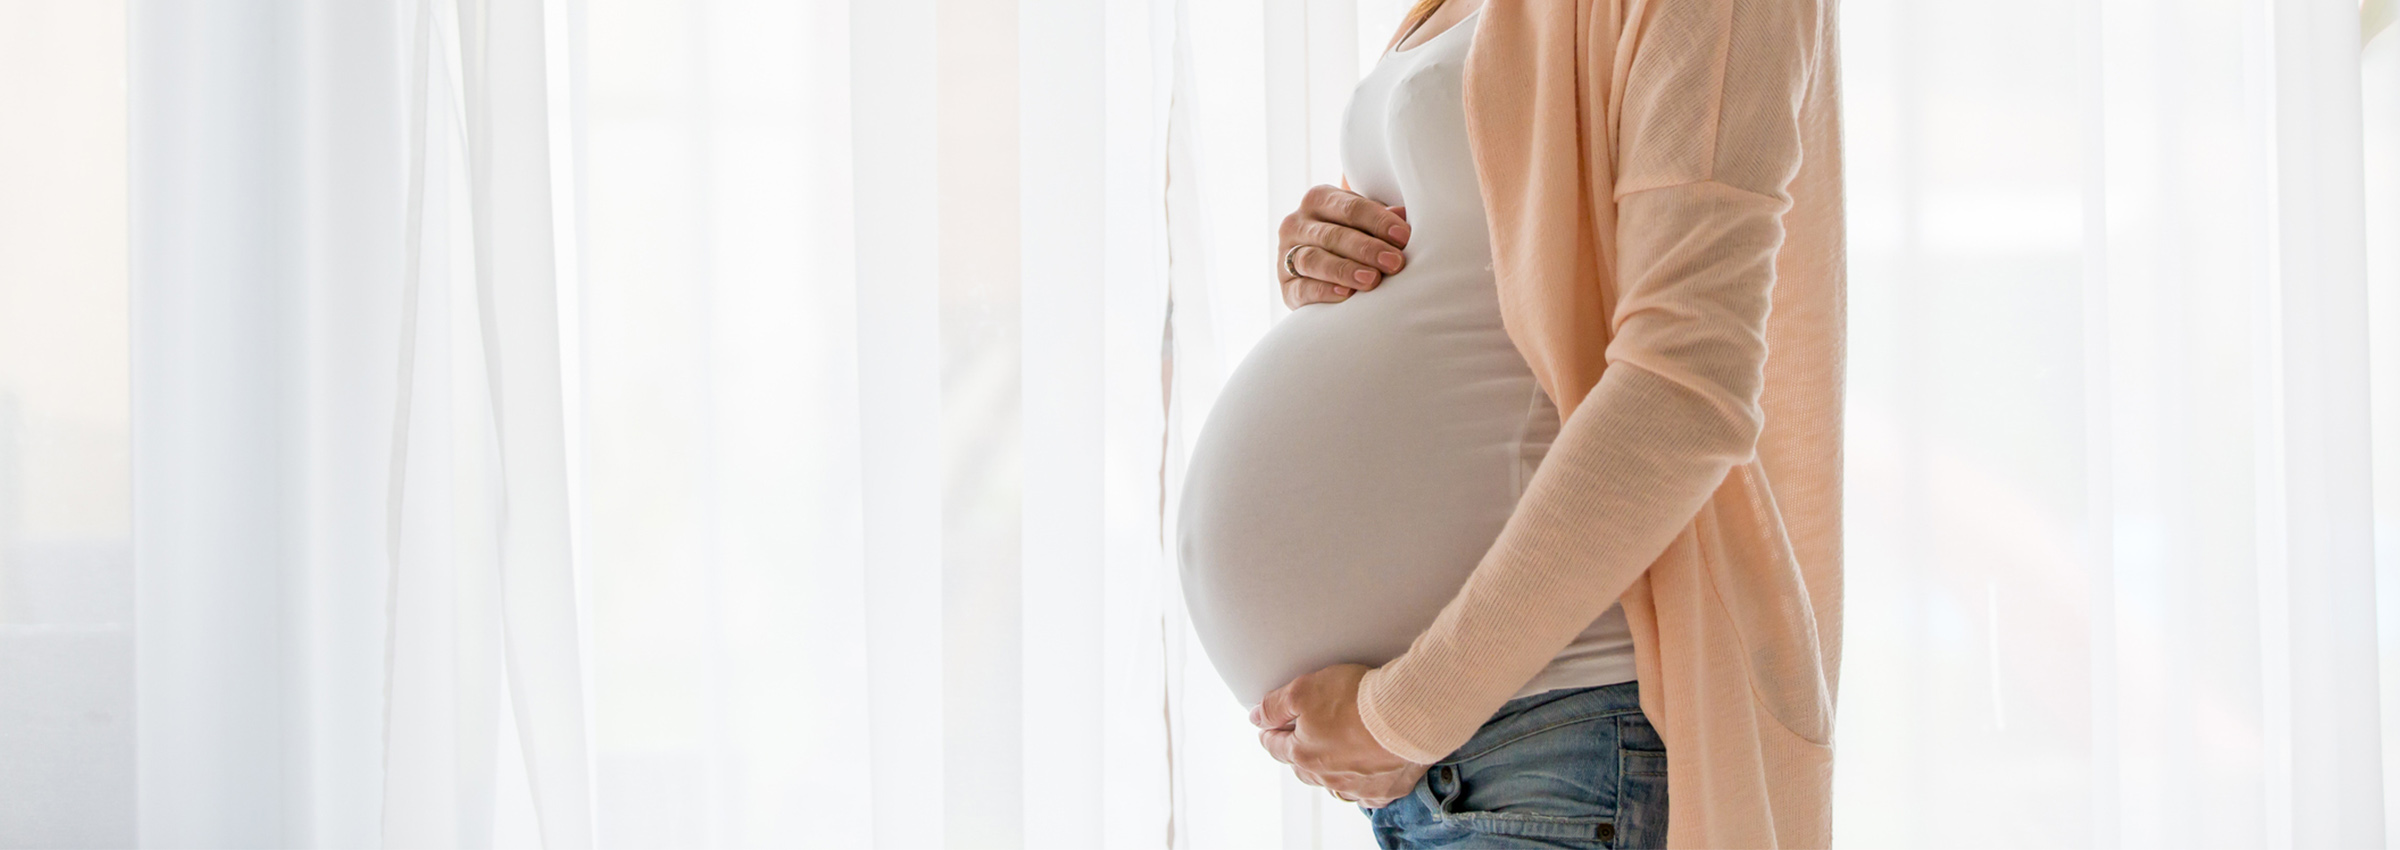 5 Benefits of Seeing a Chiropractor During Pregnancy - Healthcare ...